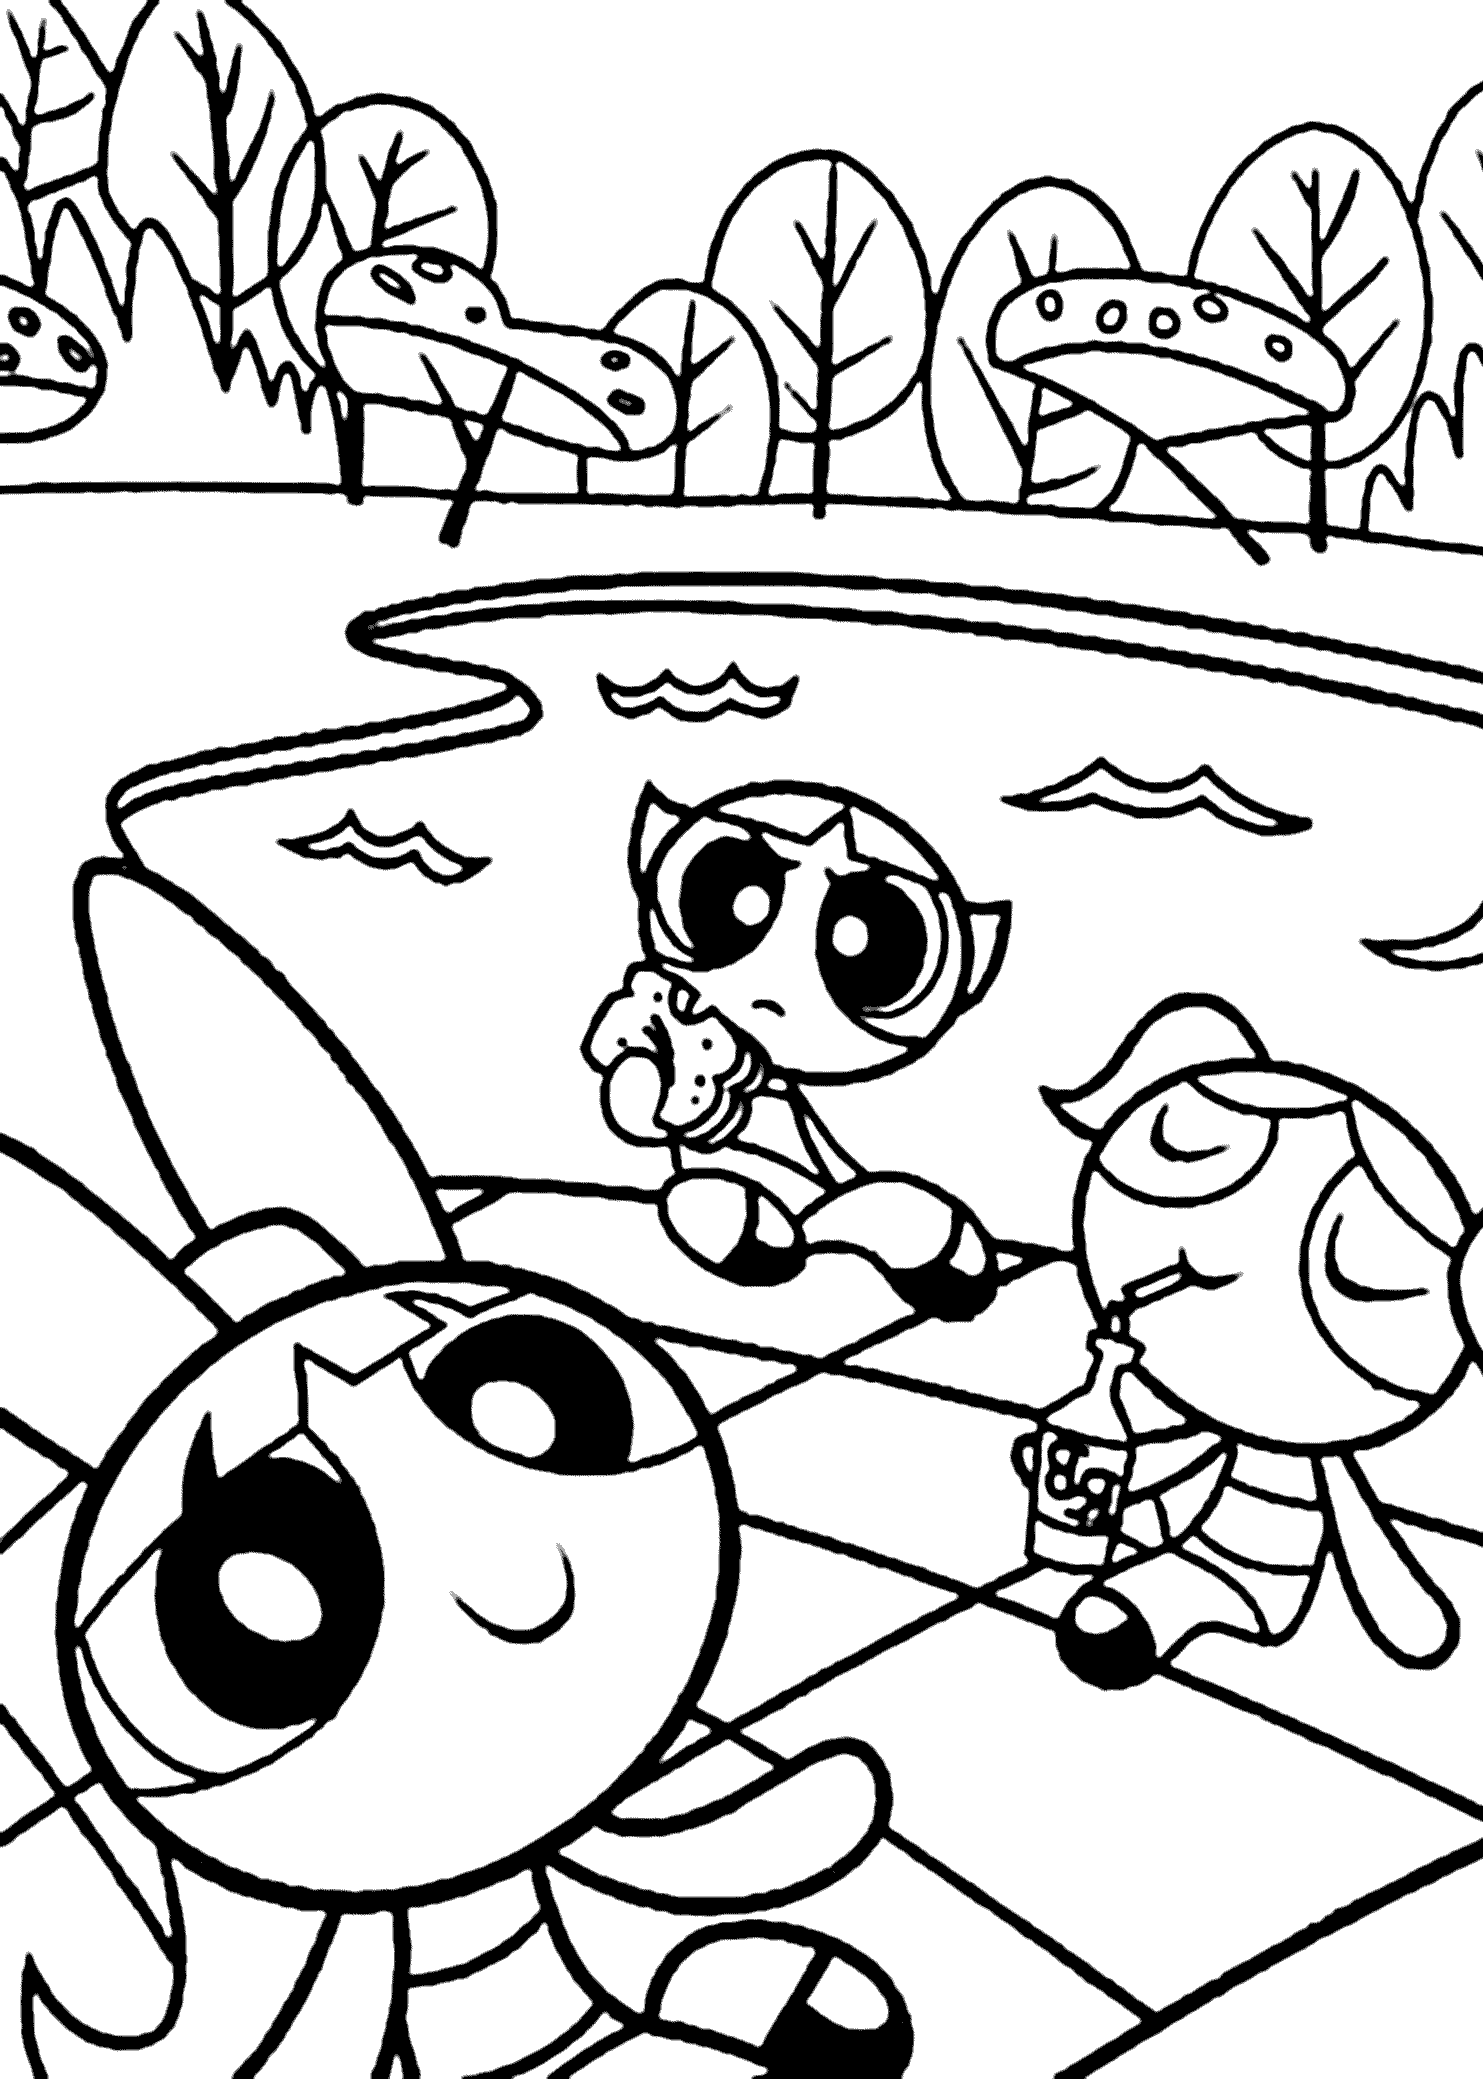 powerpuff girls color the powerpuff girls coloring pages free minister coloring color powerpuff girls 